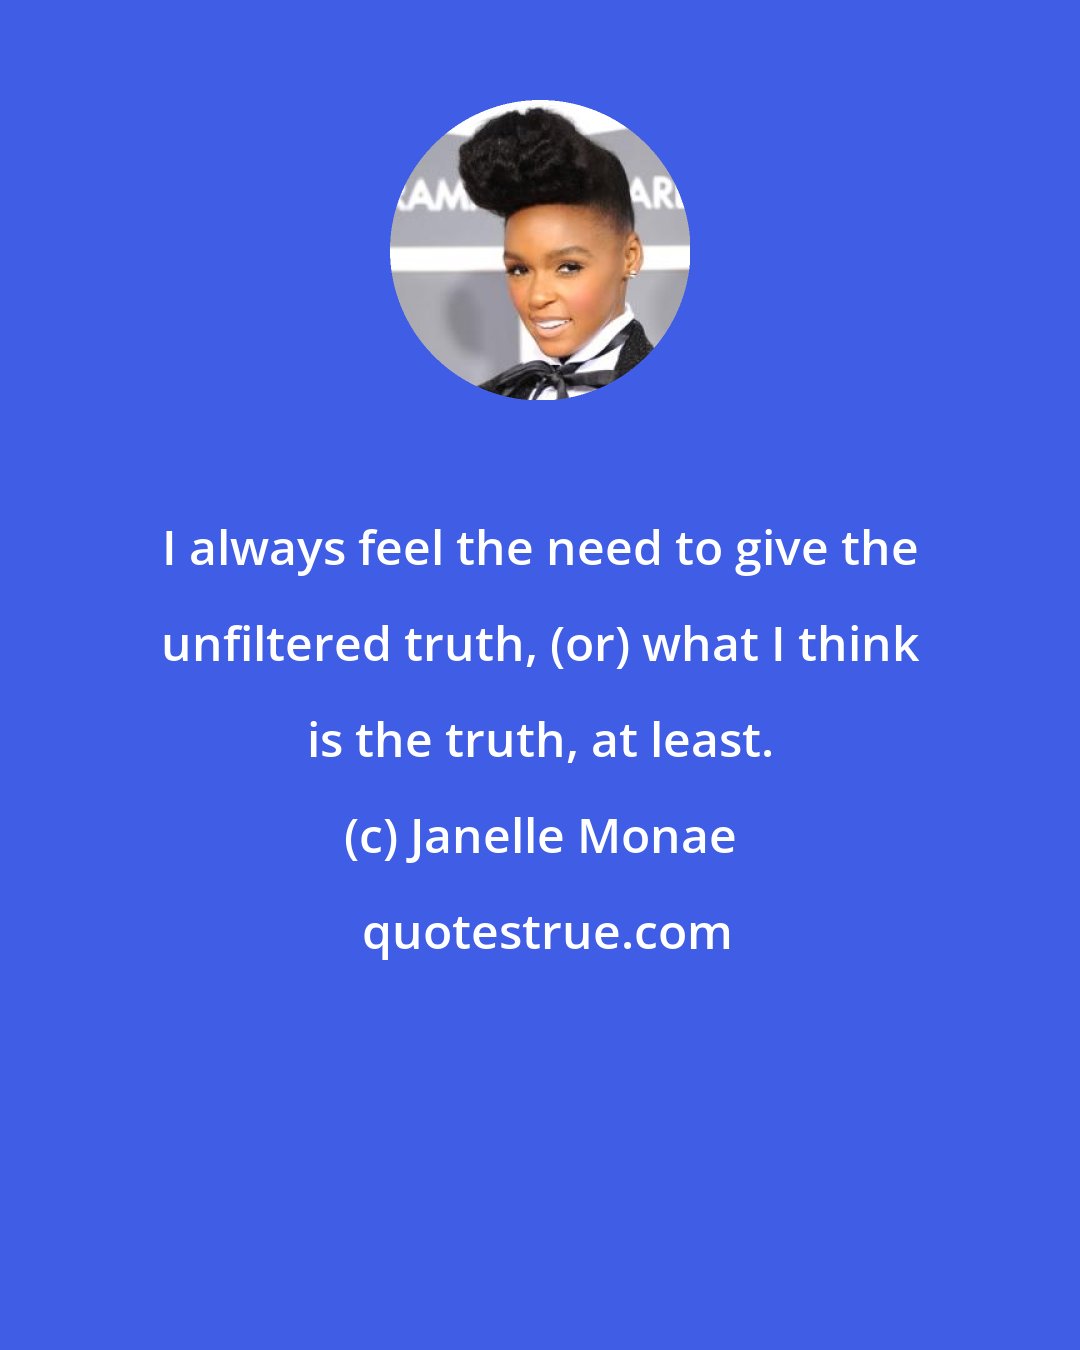 Janelle Monae: I always feel the need to give the unfiltered truth, (or) what I think is the truth, at least.